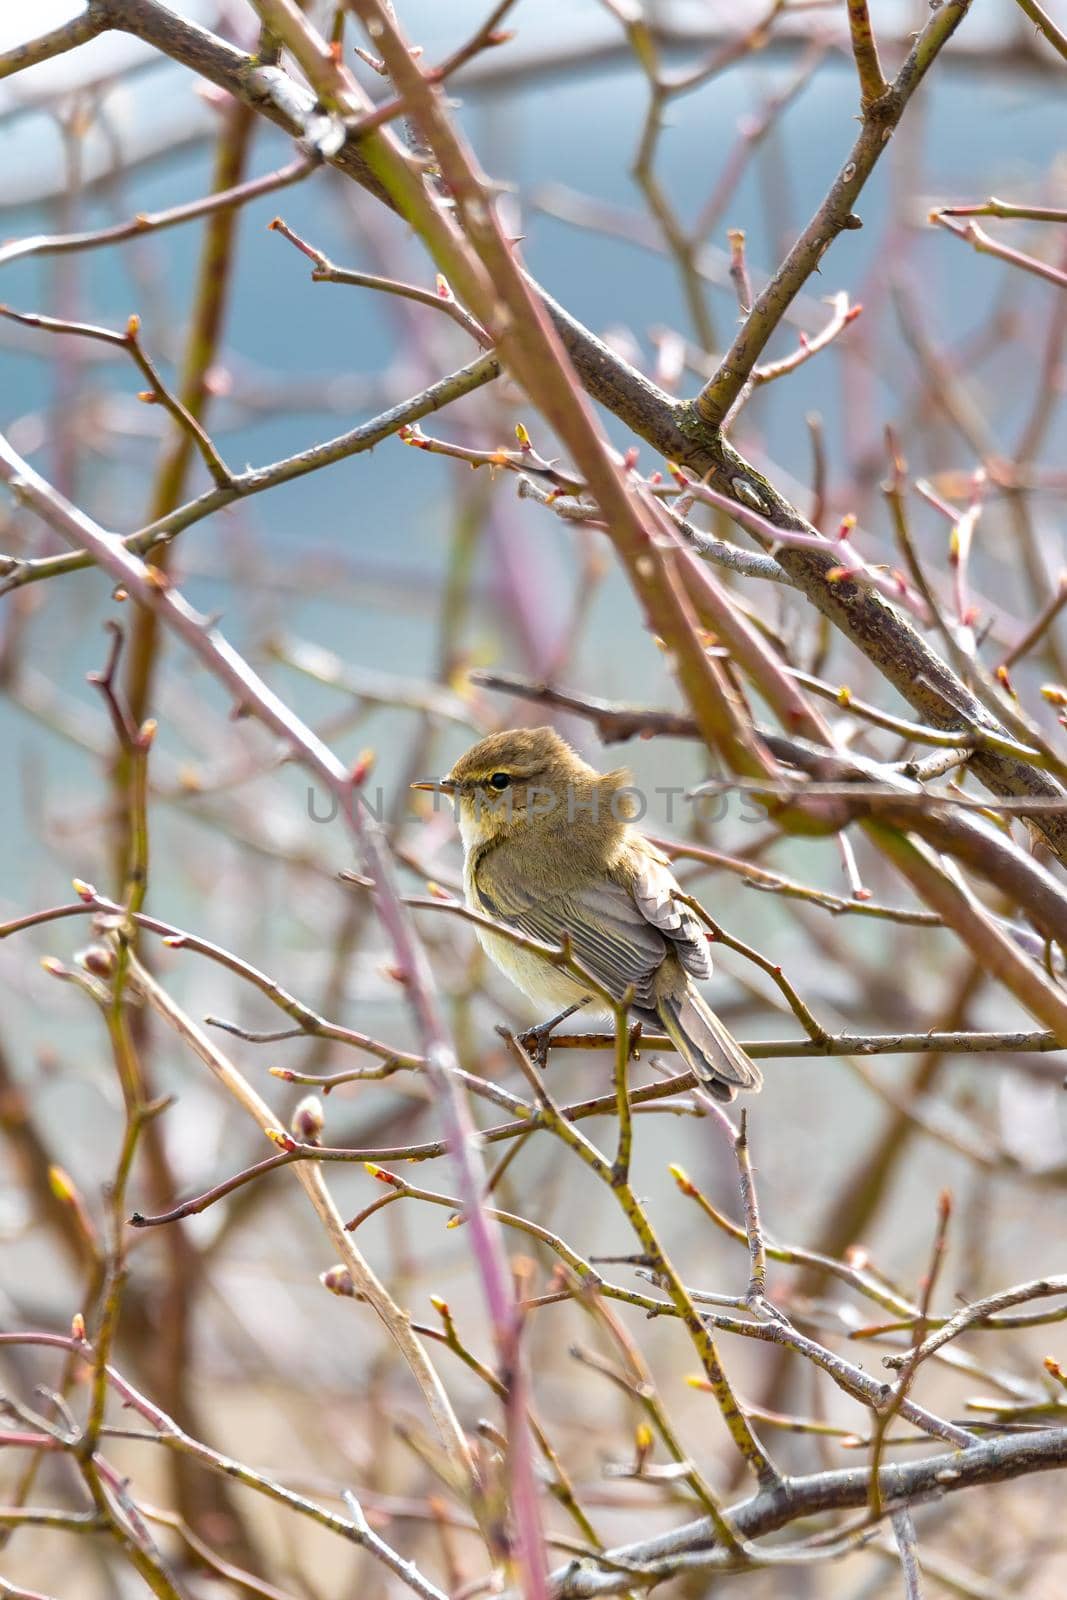 small song bird Willow Warbler, Europe wildlife by artush